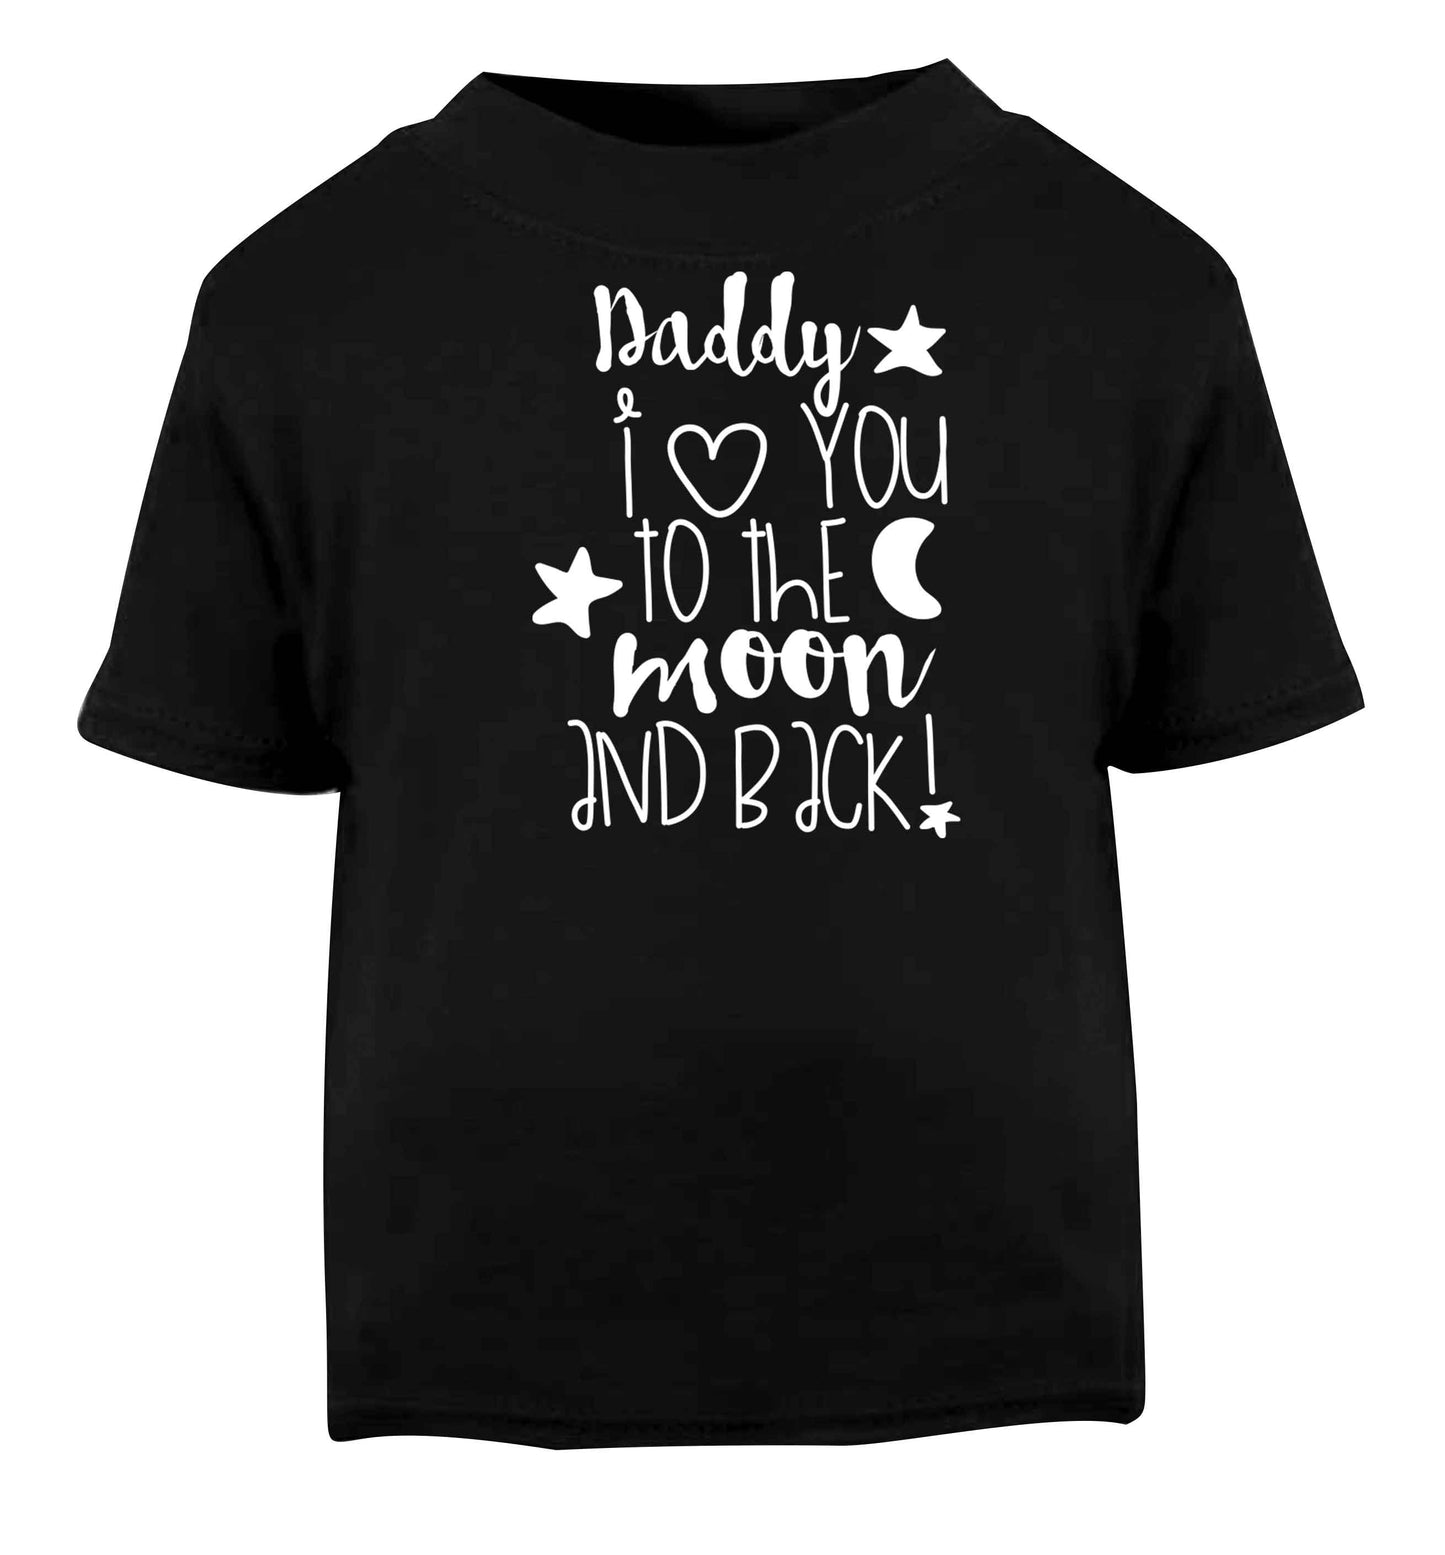 Daddy I love you to the moon and back Black baby toddler Tshirt 2 years